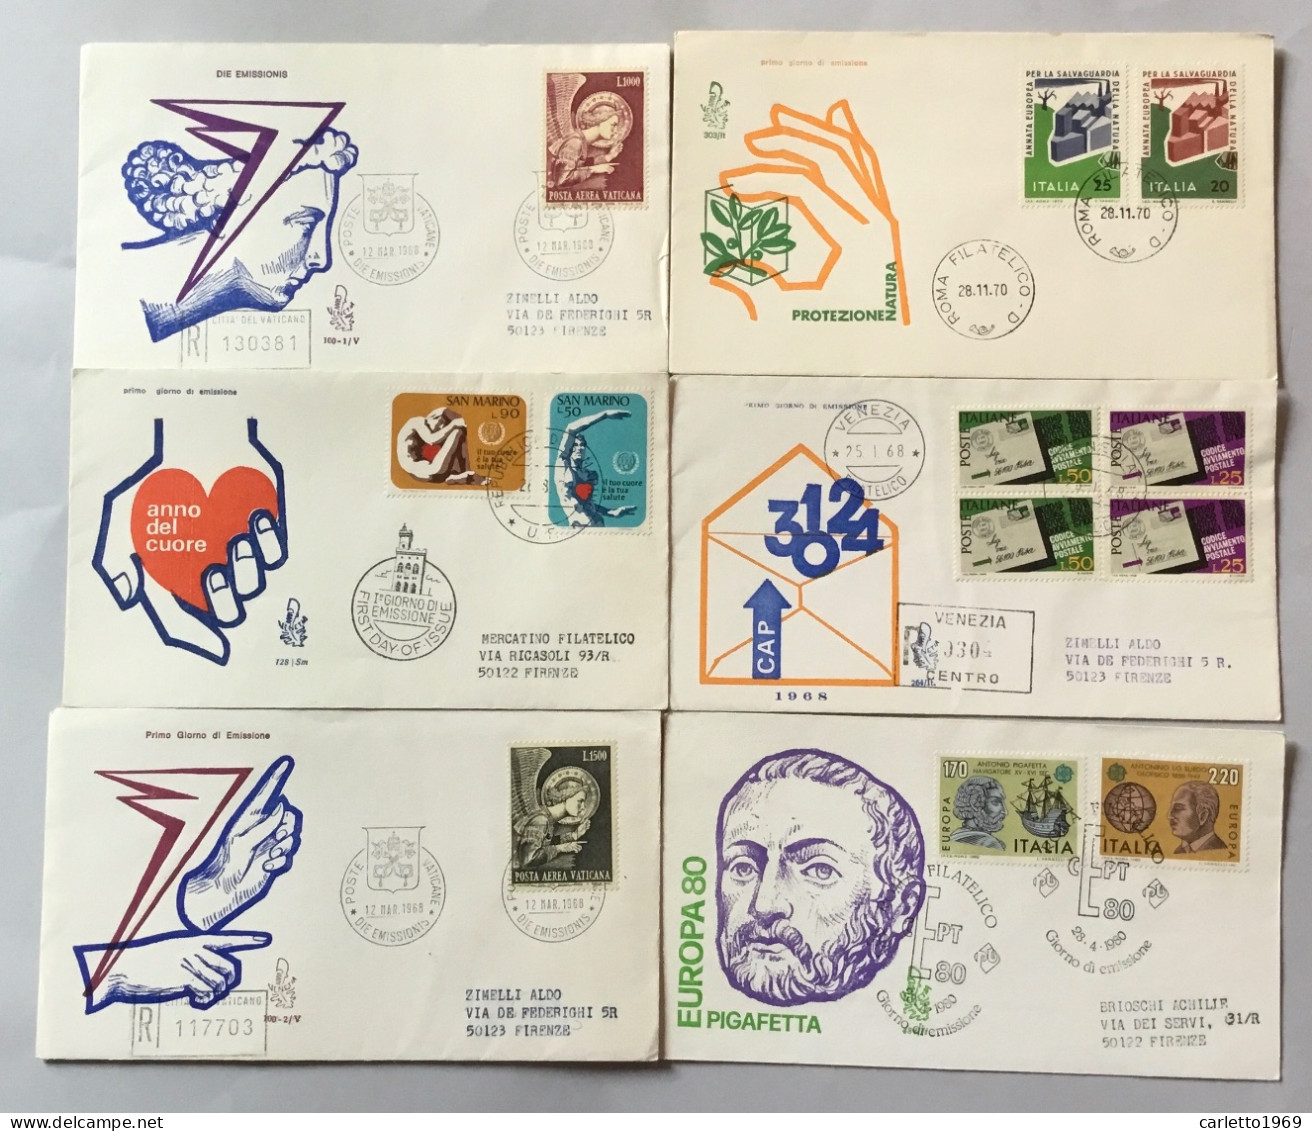 80 BUSTE FDC - FIRST DAY ISSUE - DAL 1959 Al 1977 - 5 VENETIA - FDC